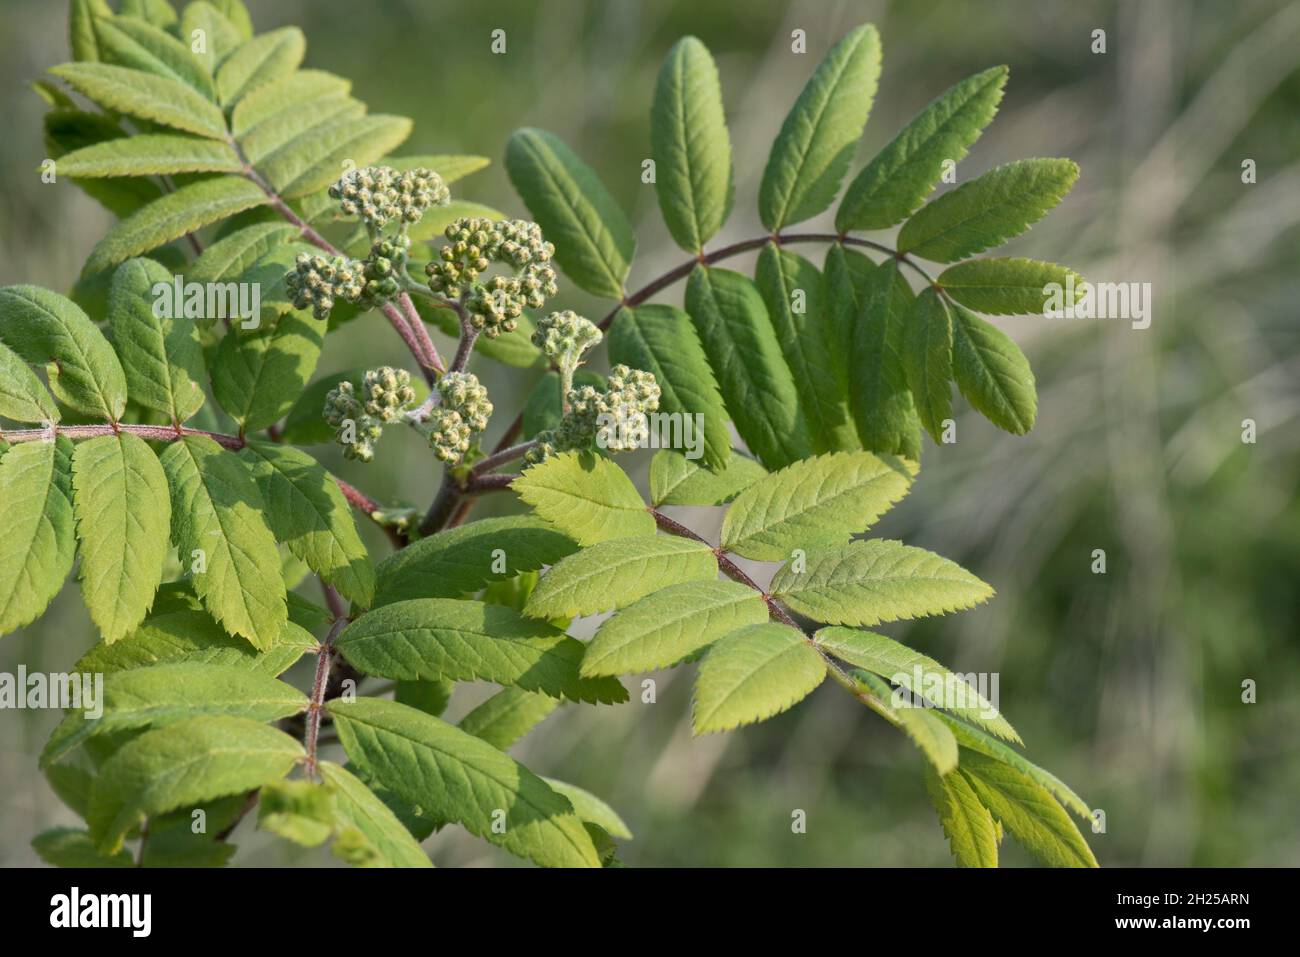 Rowan or mountain ash (Sorbus aucuparia) young leaves and flower buds of a small tree in spring, Berkshire, April Stock Photo